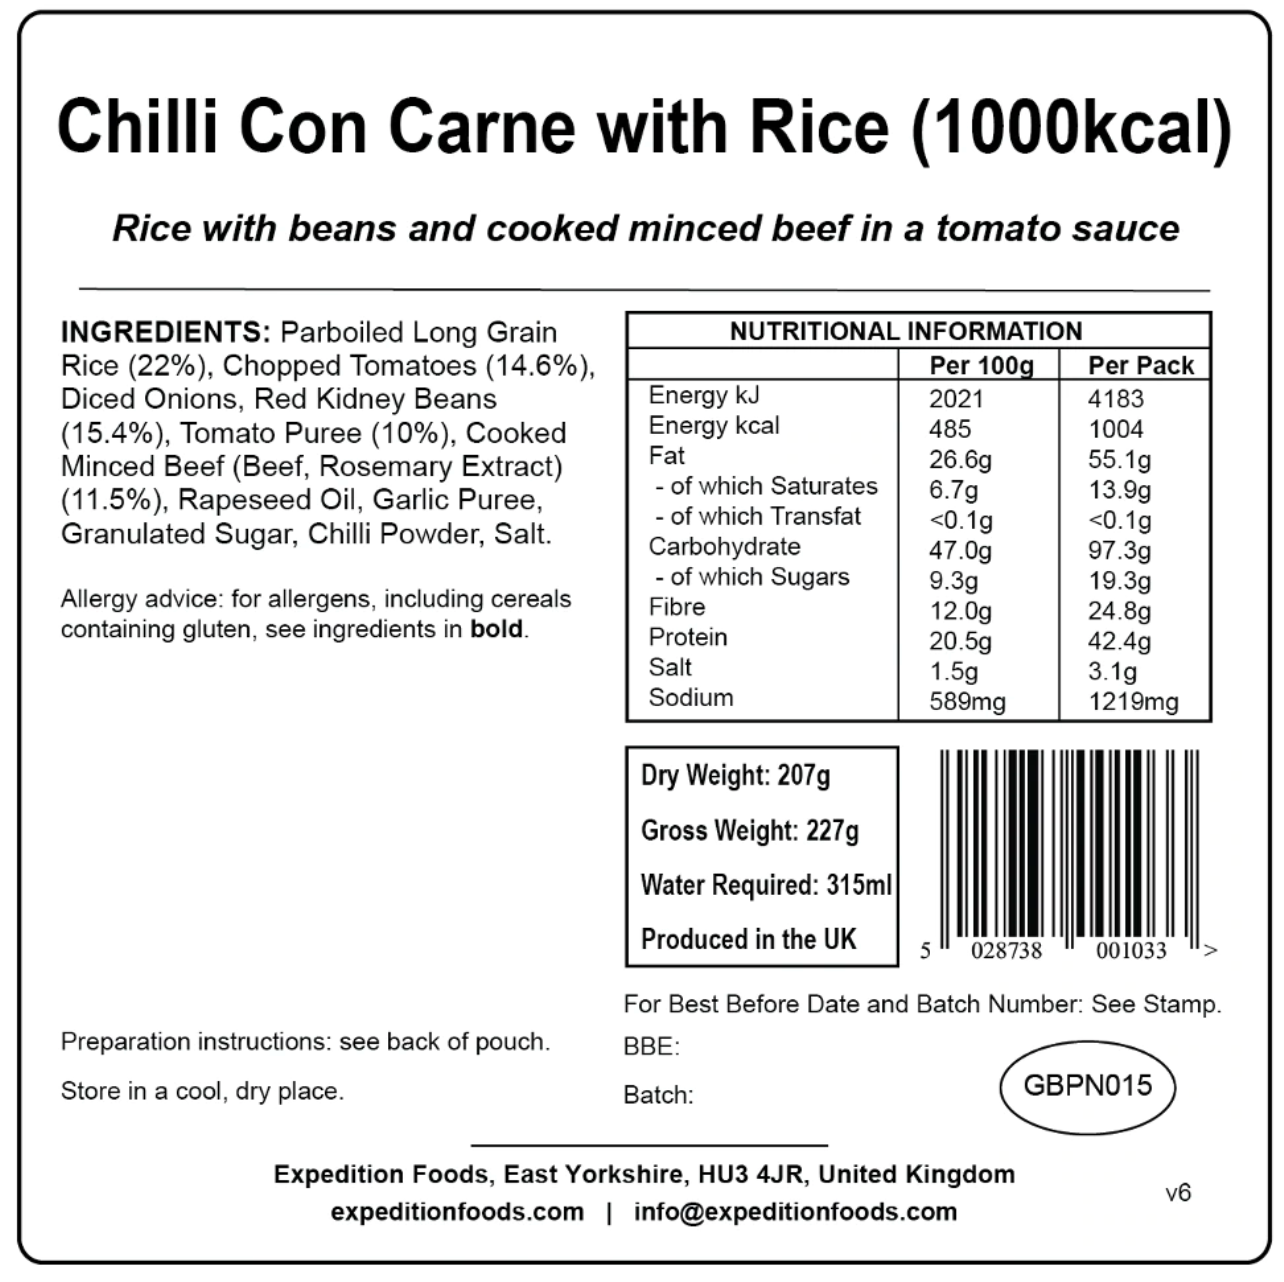 Expedition Foods Chili Con Carne with Rice